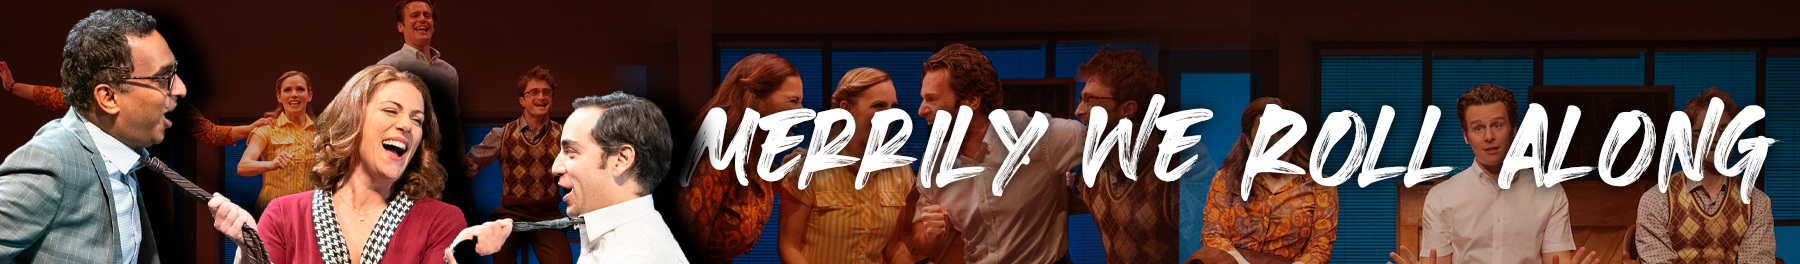 Merrily We Roll Along Broadway Show